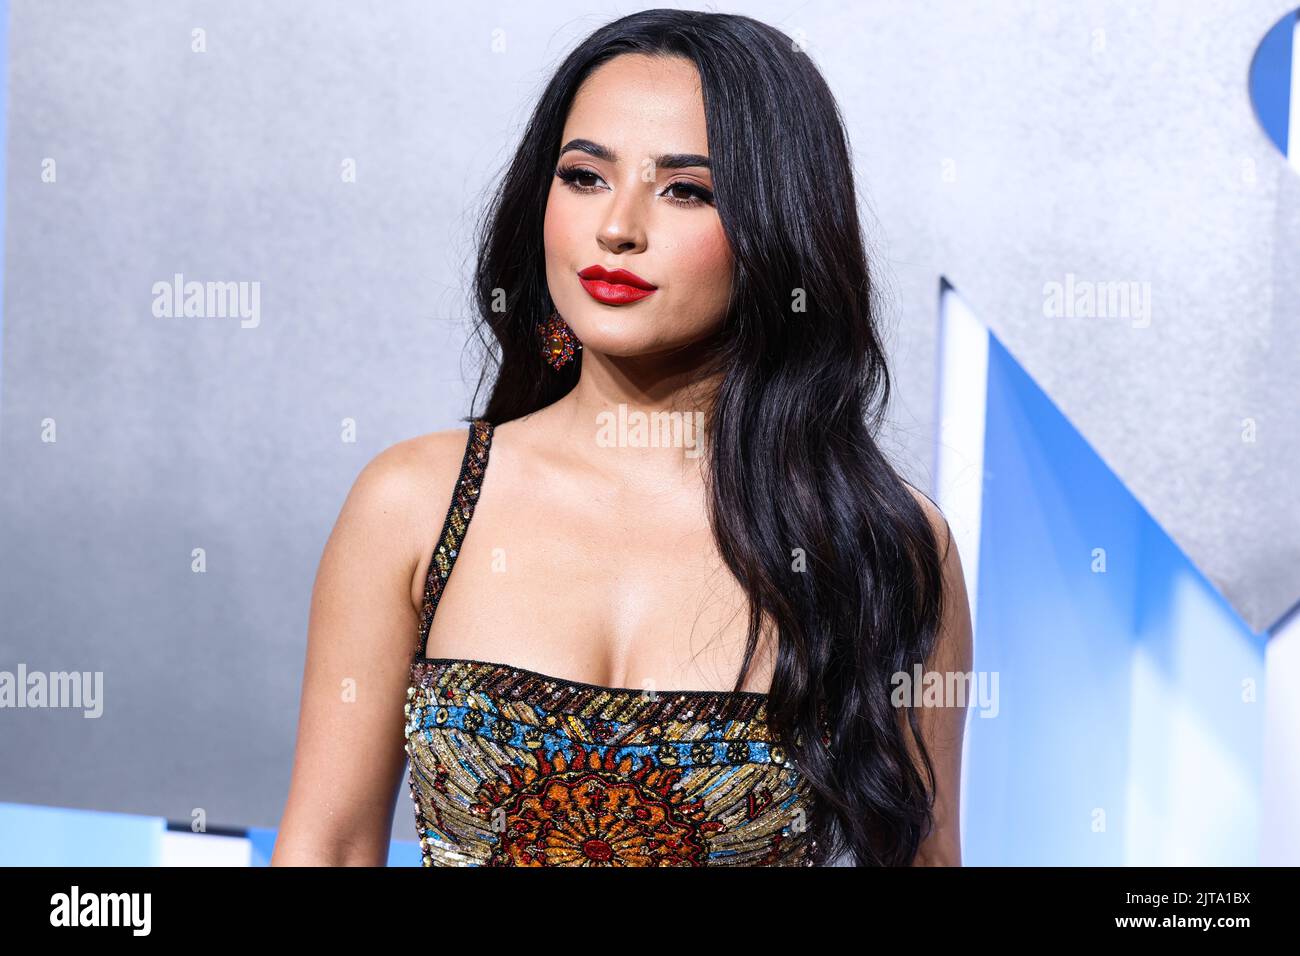 NEWARK, NEW JERSEY, USA - AUGUST 28: Becky G arrives at the 2022 MTV Video Music Awards held at the Prudential Center on August 28, 2022 in Newark, New Jersey, USA. (Photo by Xavier Collin/Image Press Agency) Stock Photo